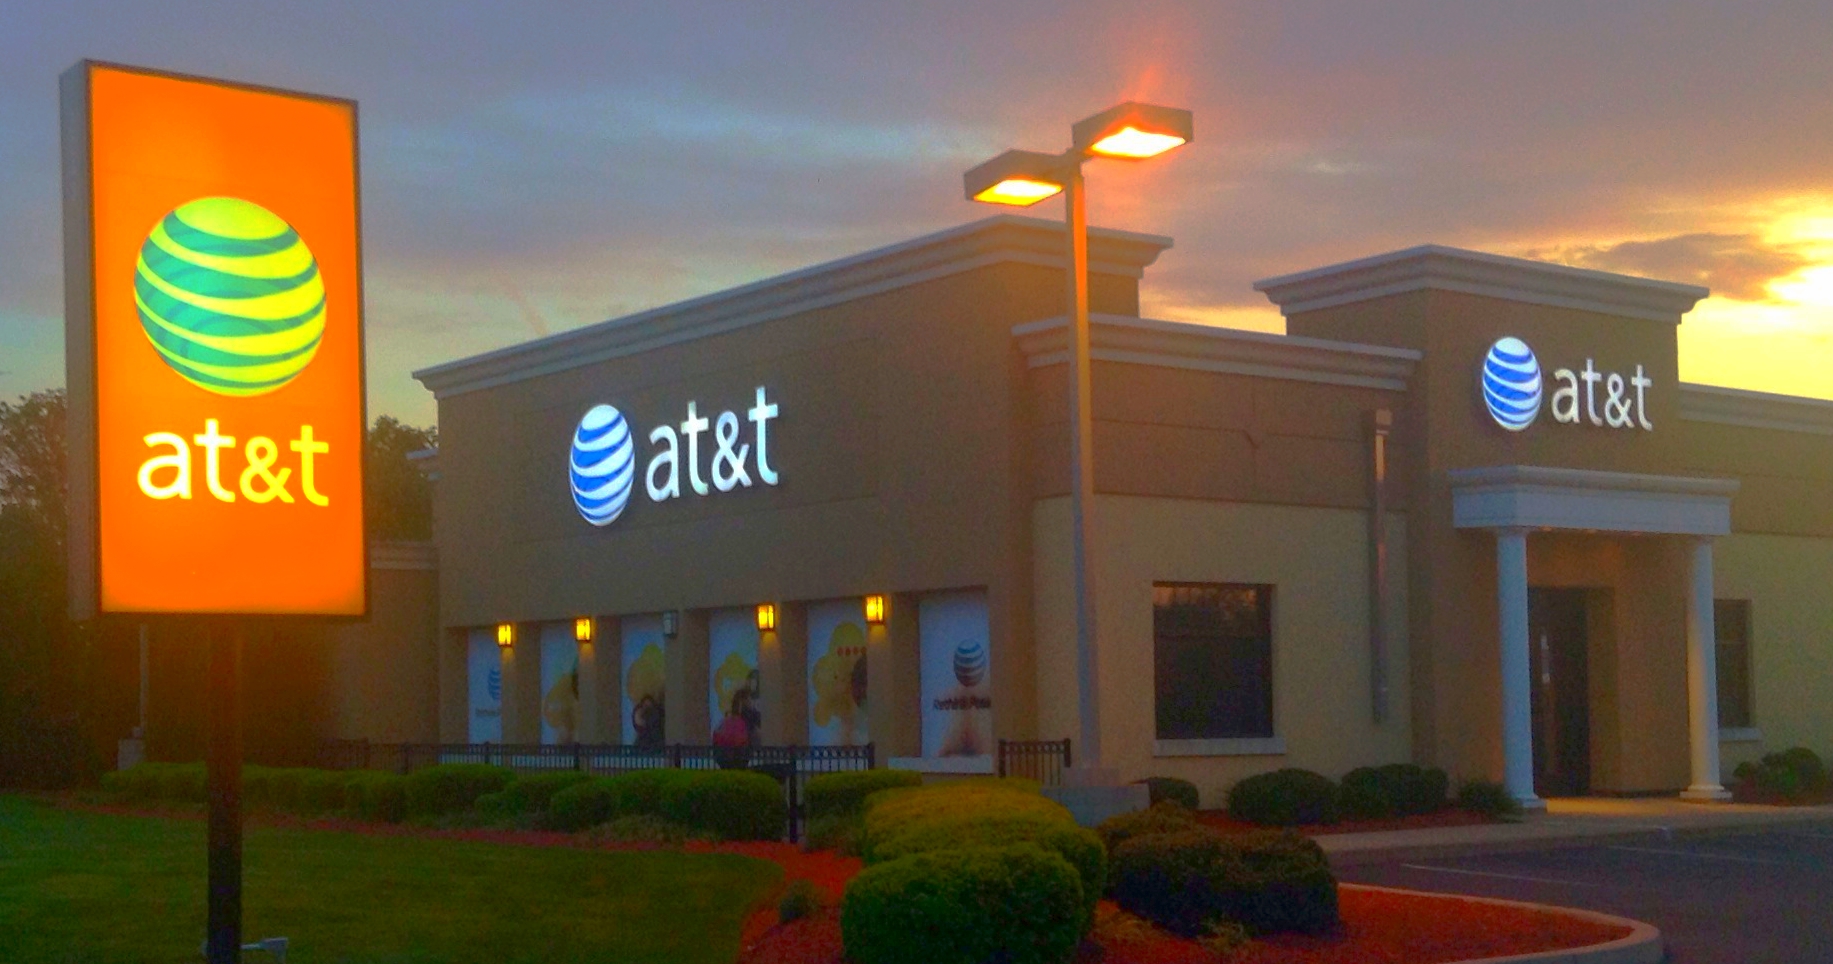 the at & t store with a sign in front